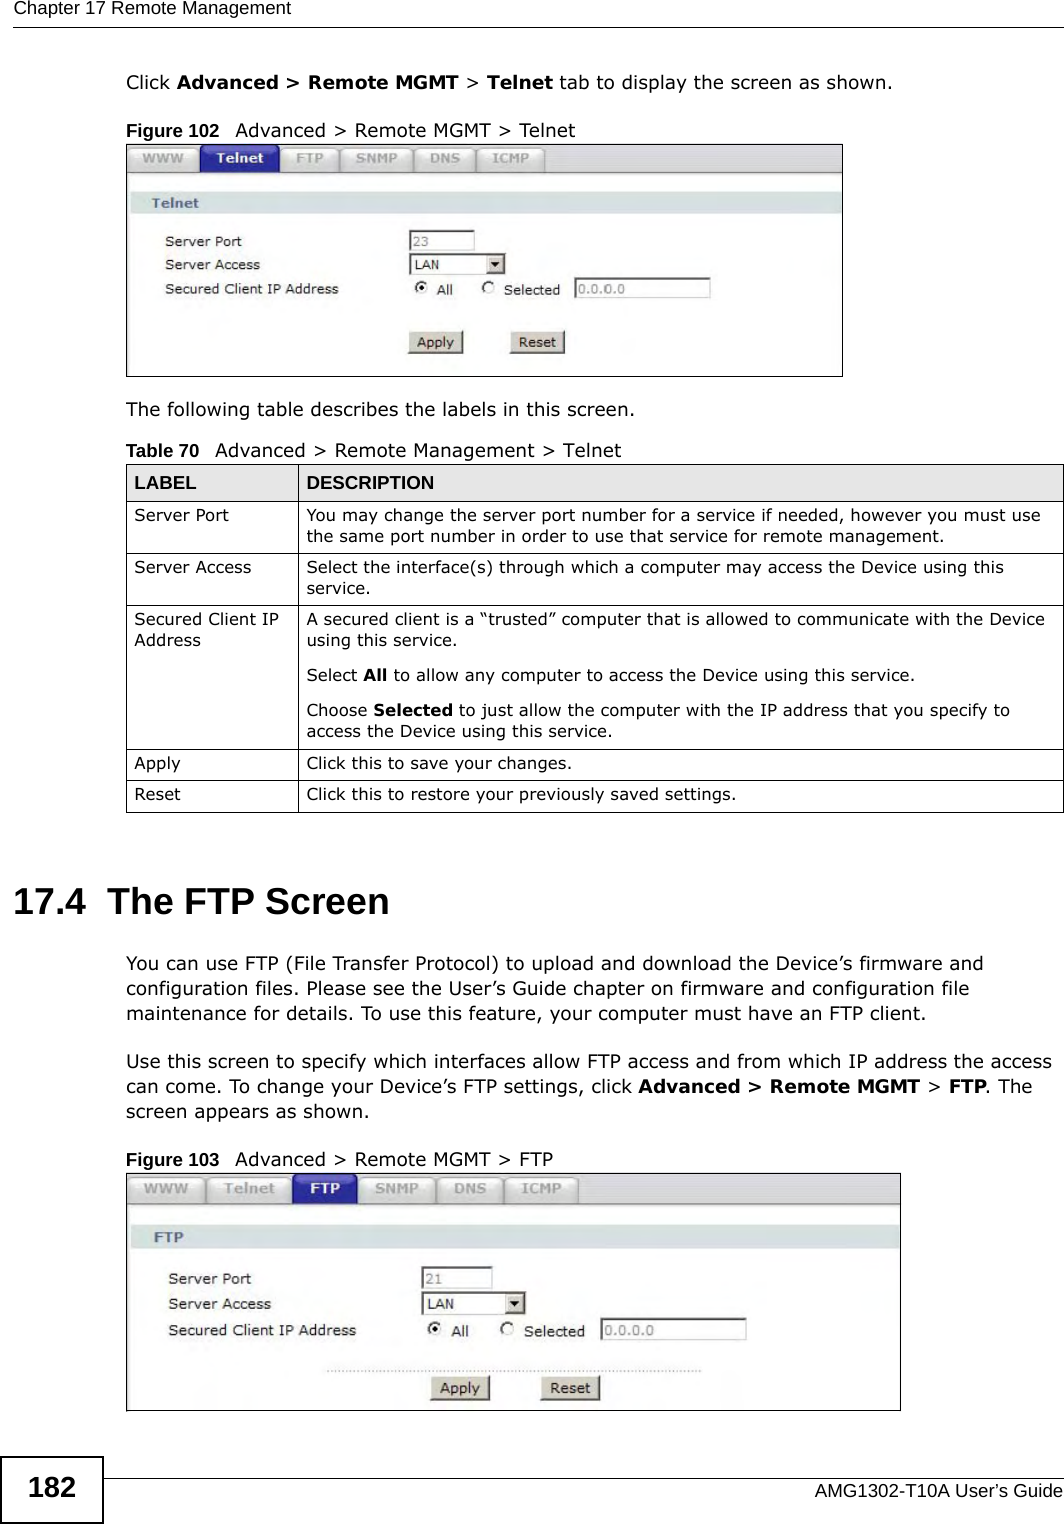 Chapter 17 Remote ManagementAMG1302-T10A User’s Guide182Click Advanced &gt; Remote MGMT &gt; Telnet tab to display the screen as shown. Figure 102   Advanced &gt; Remote MGMT &gt; TelnetThe following table describes the labels in this screen.17.4  The FTP Screen You can use FTP (File Transfer Protocol) to upload and download the Device’s firmware and configuration files. Please see the User’s Guide chapter on firmware and configuration file maintenance for details. To use this feature, your computer must have an FTP client.Use this screen to specify which interfaces allow FTP access and from which IP address the access can come. To change your Device’s FTP settings, click Advanced &gt; Remote MGMT &gt; FTP. The screen appears as shown.Figure 103   Advanced &gt; Remote MGMT &gt; FTPTable 70   Advanced &gt; Remote Management &gt; TelnetLABEL DESCRIPTIONServer Port You may change the server port number for a service if needed, however you must use the same port number in order to use that service for remote management.Server Access Select the interface(s) through which a computer may access the Device using this service.Secured Client IP AddressA secured client is a “trusted” computer that is allowed to communicate with the Device using this service. Select All to allow any computer to access the Device using this service.Choose Selected to just allow the computer with the IP address that you specify to access the Device using this service.Apply Click this to save your changes.Reset Click this to restore your previously saved settings.